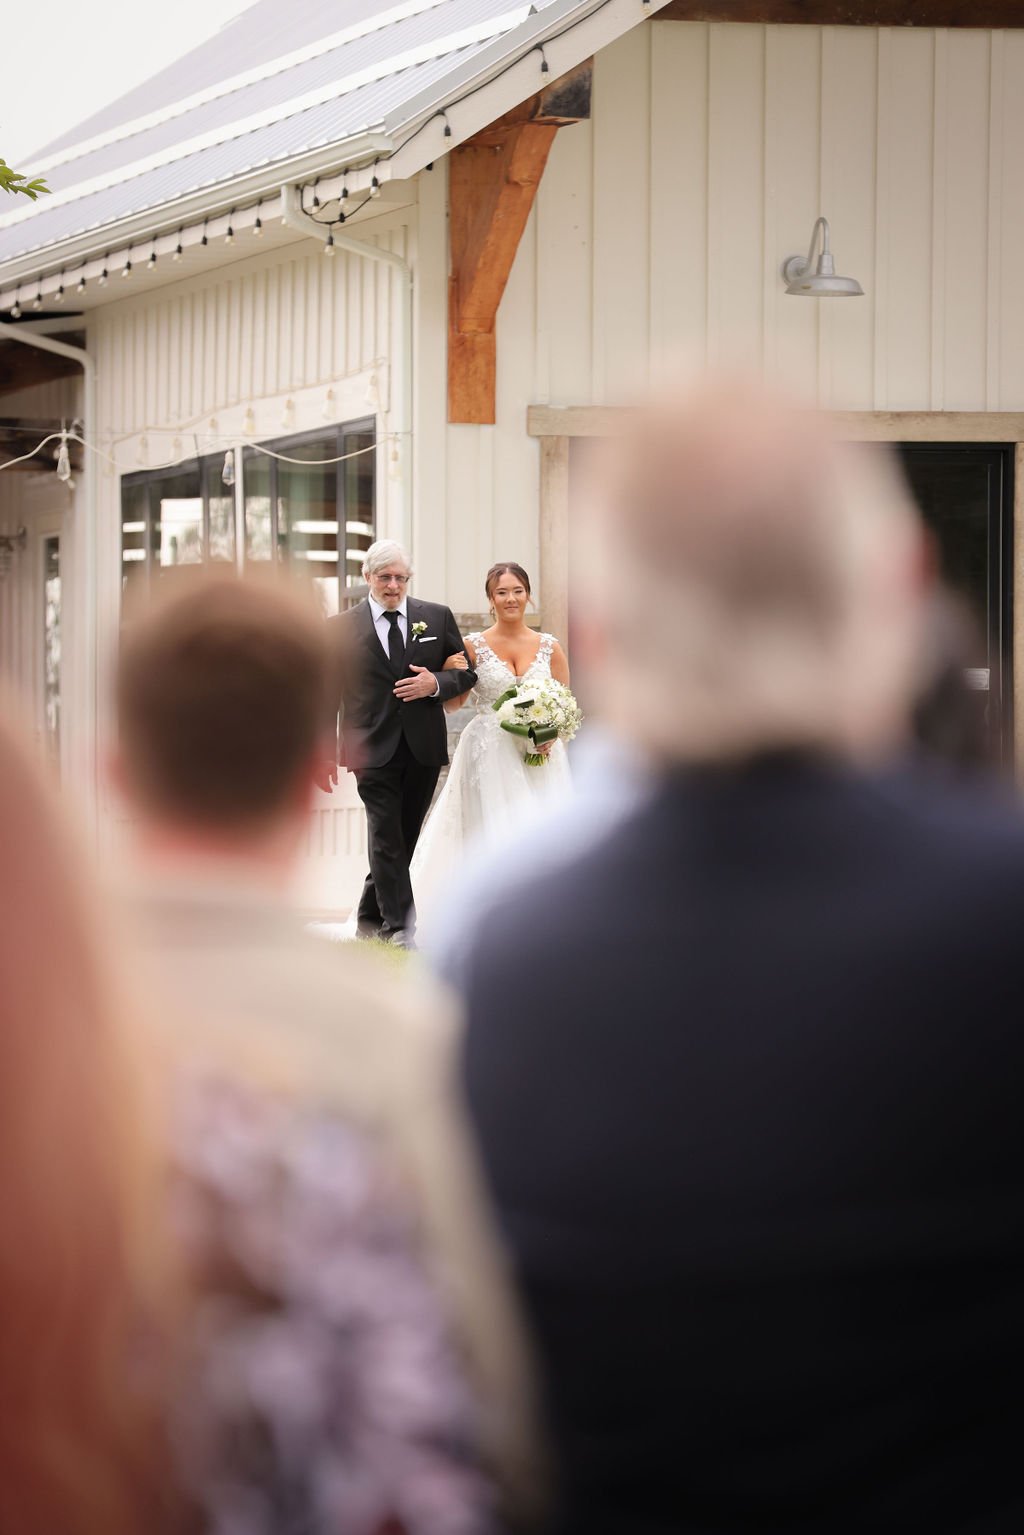 Bride walking down aisle with father.jpg